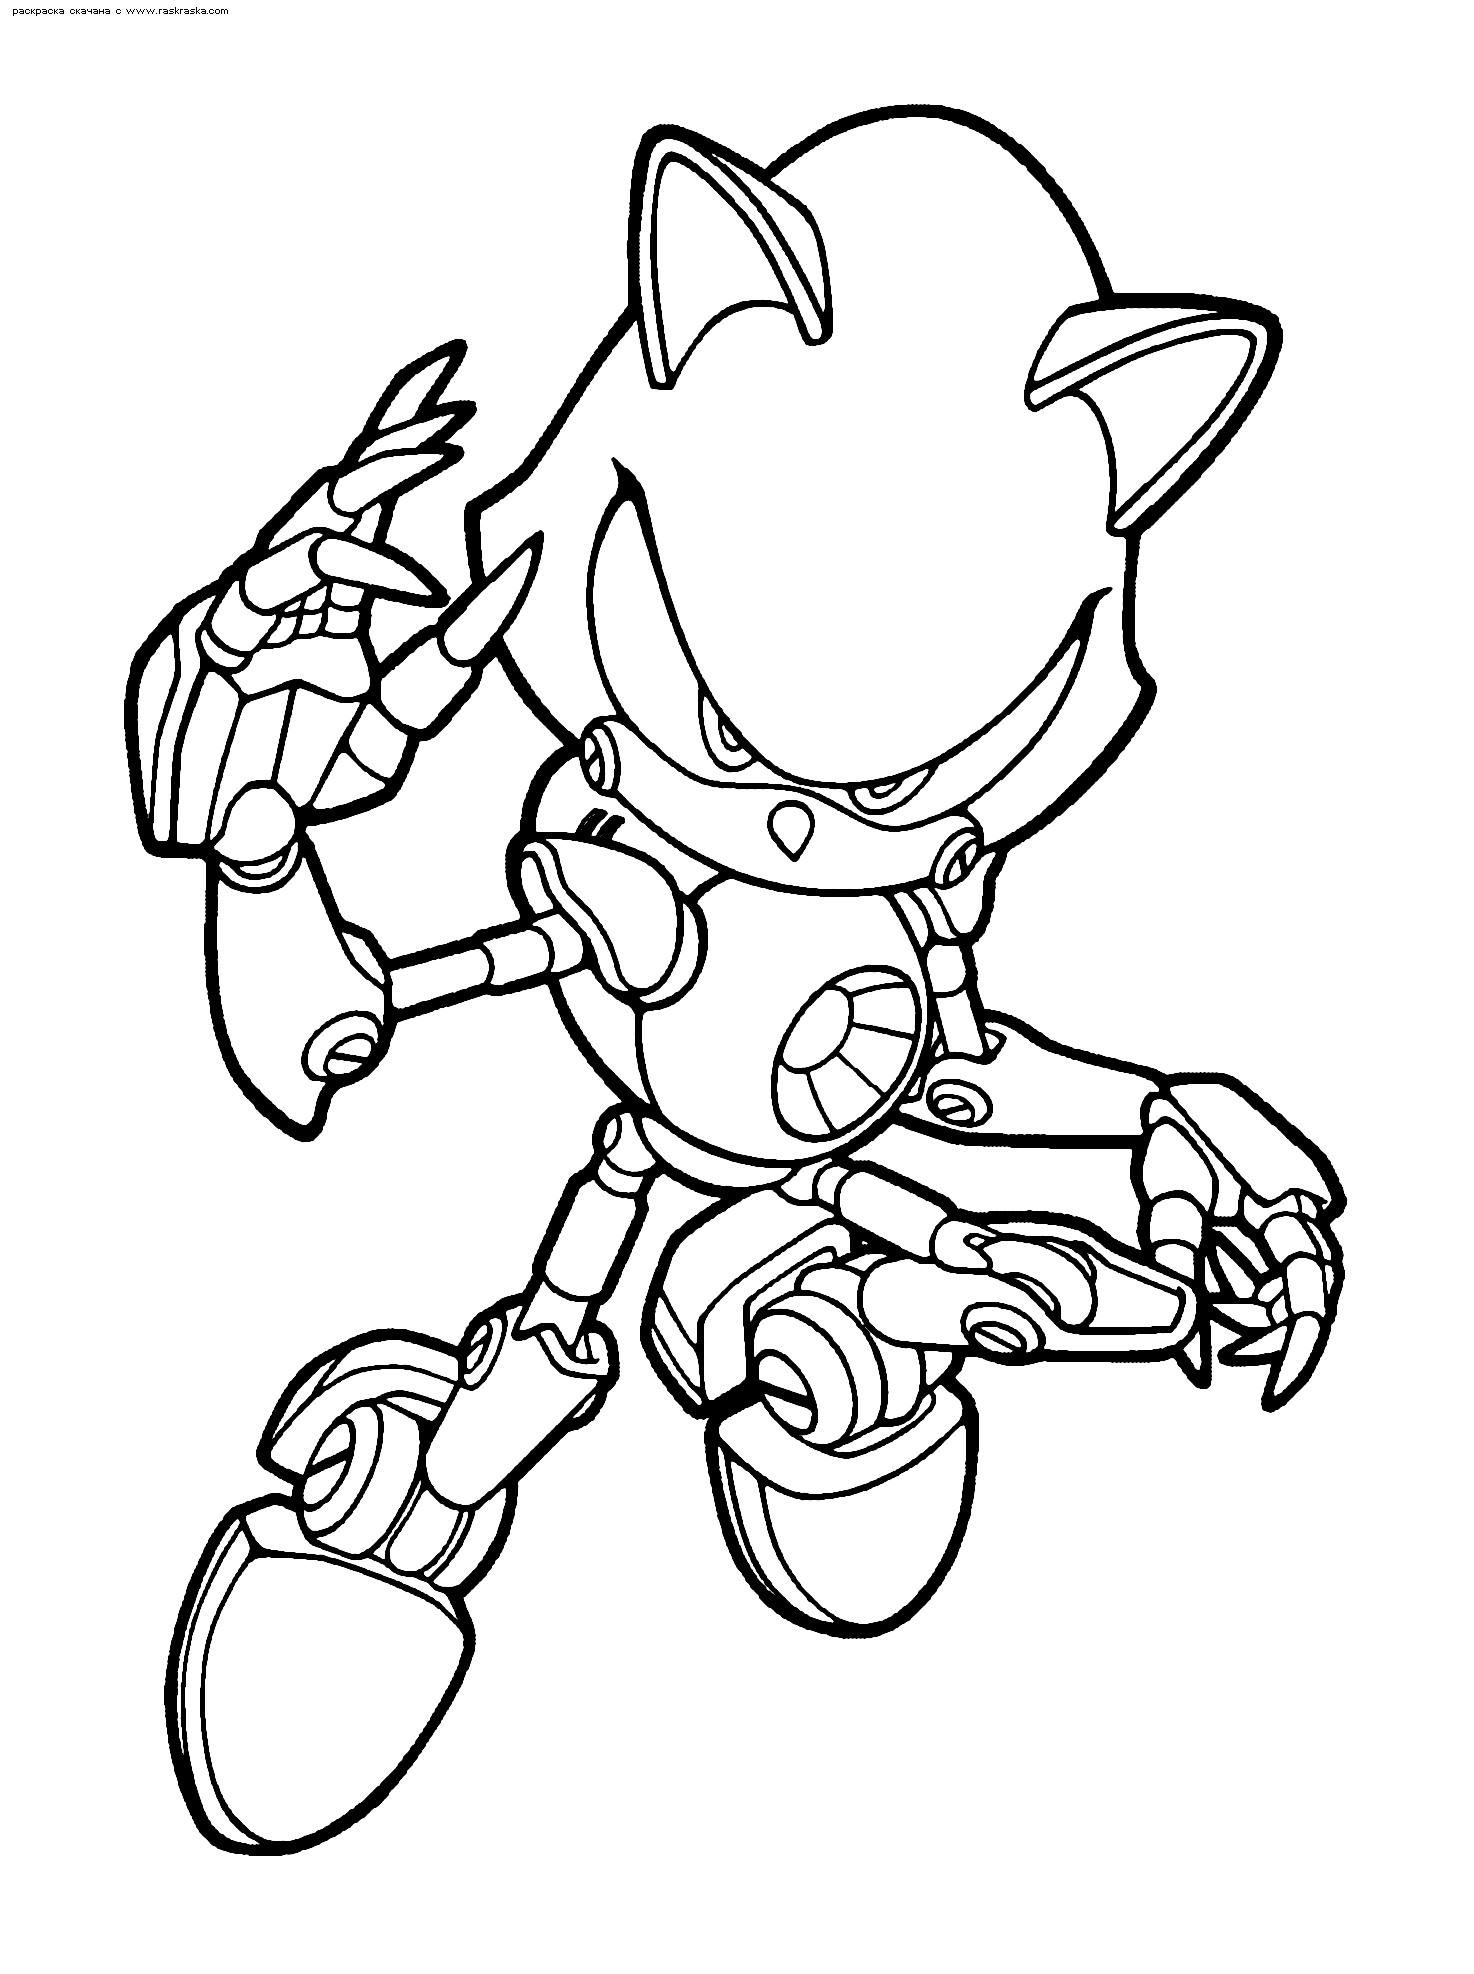 Coloring page: Sonic (Video Games) #153846 - Printable coloring pages